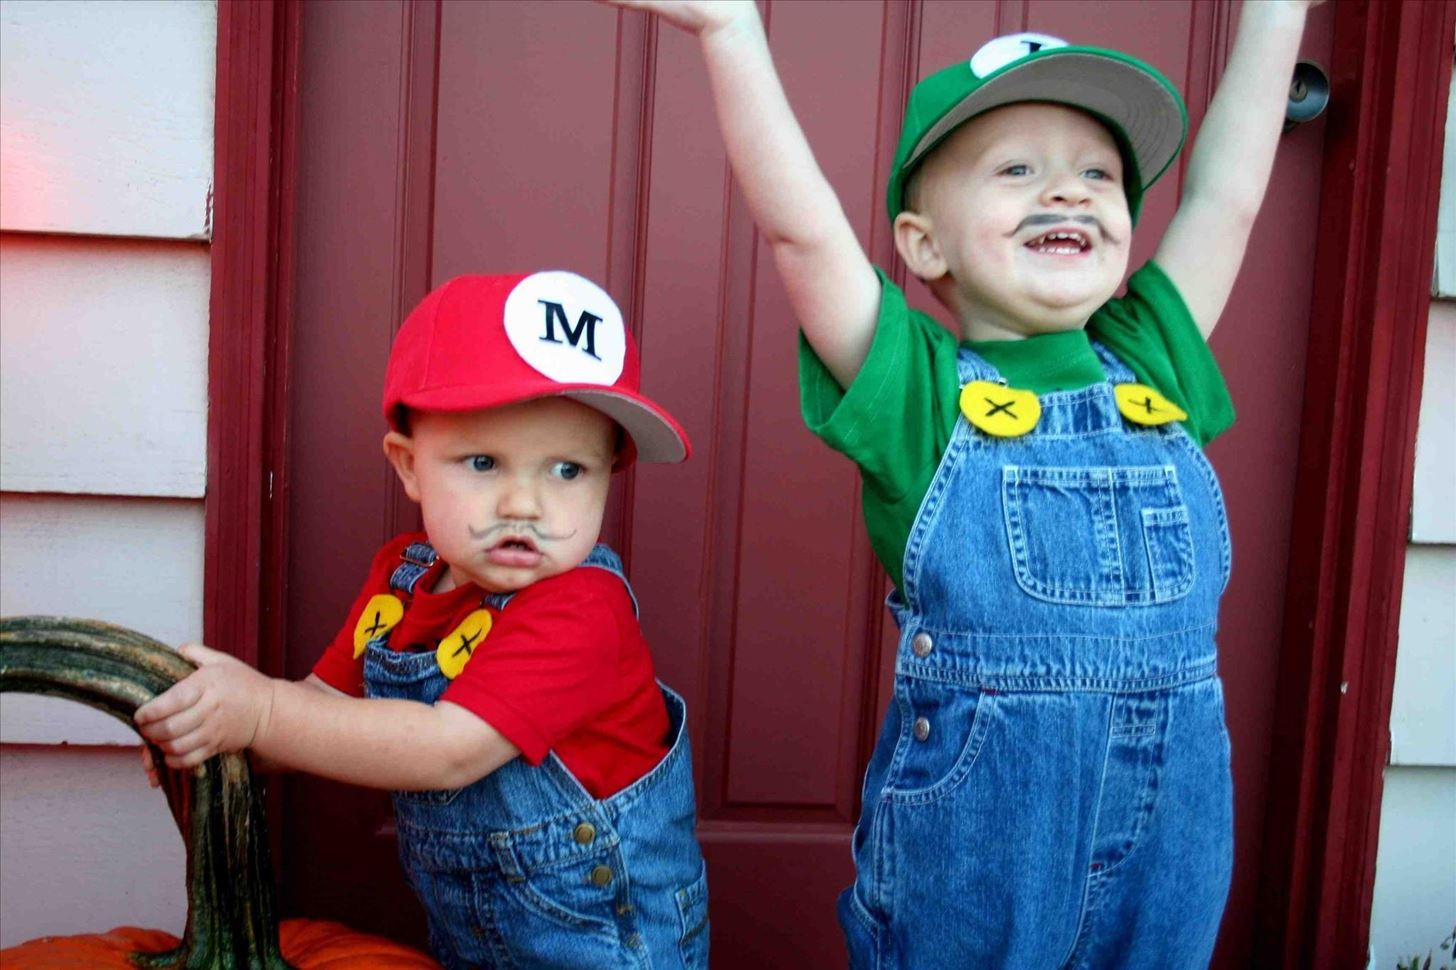 Easy DIY Kids Costumes
 10 Cheap Easy & Awesome DIY Halloween Costumes for Kids